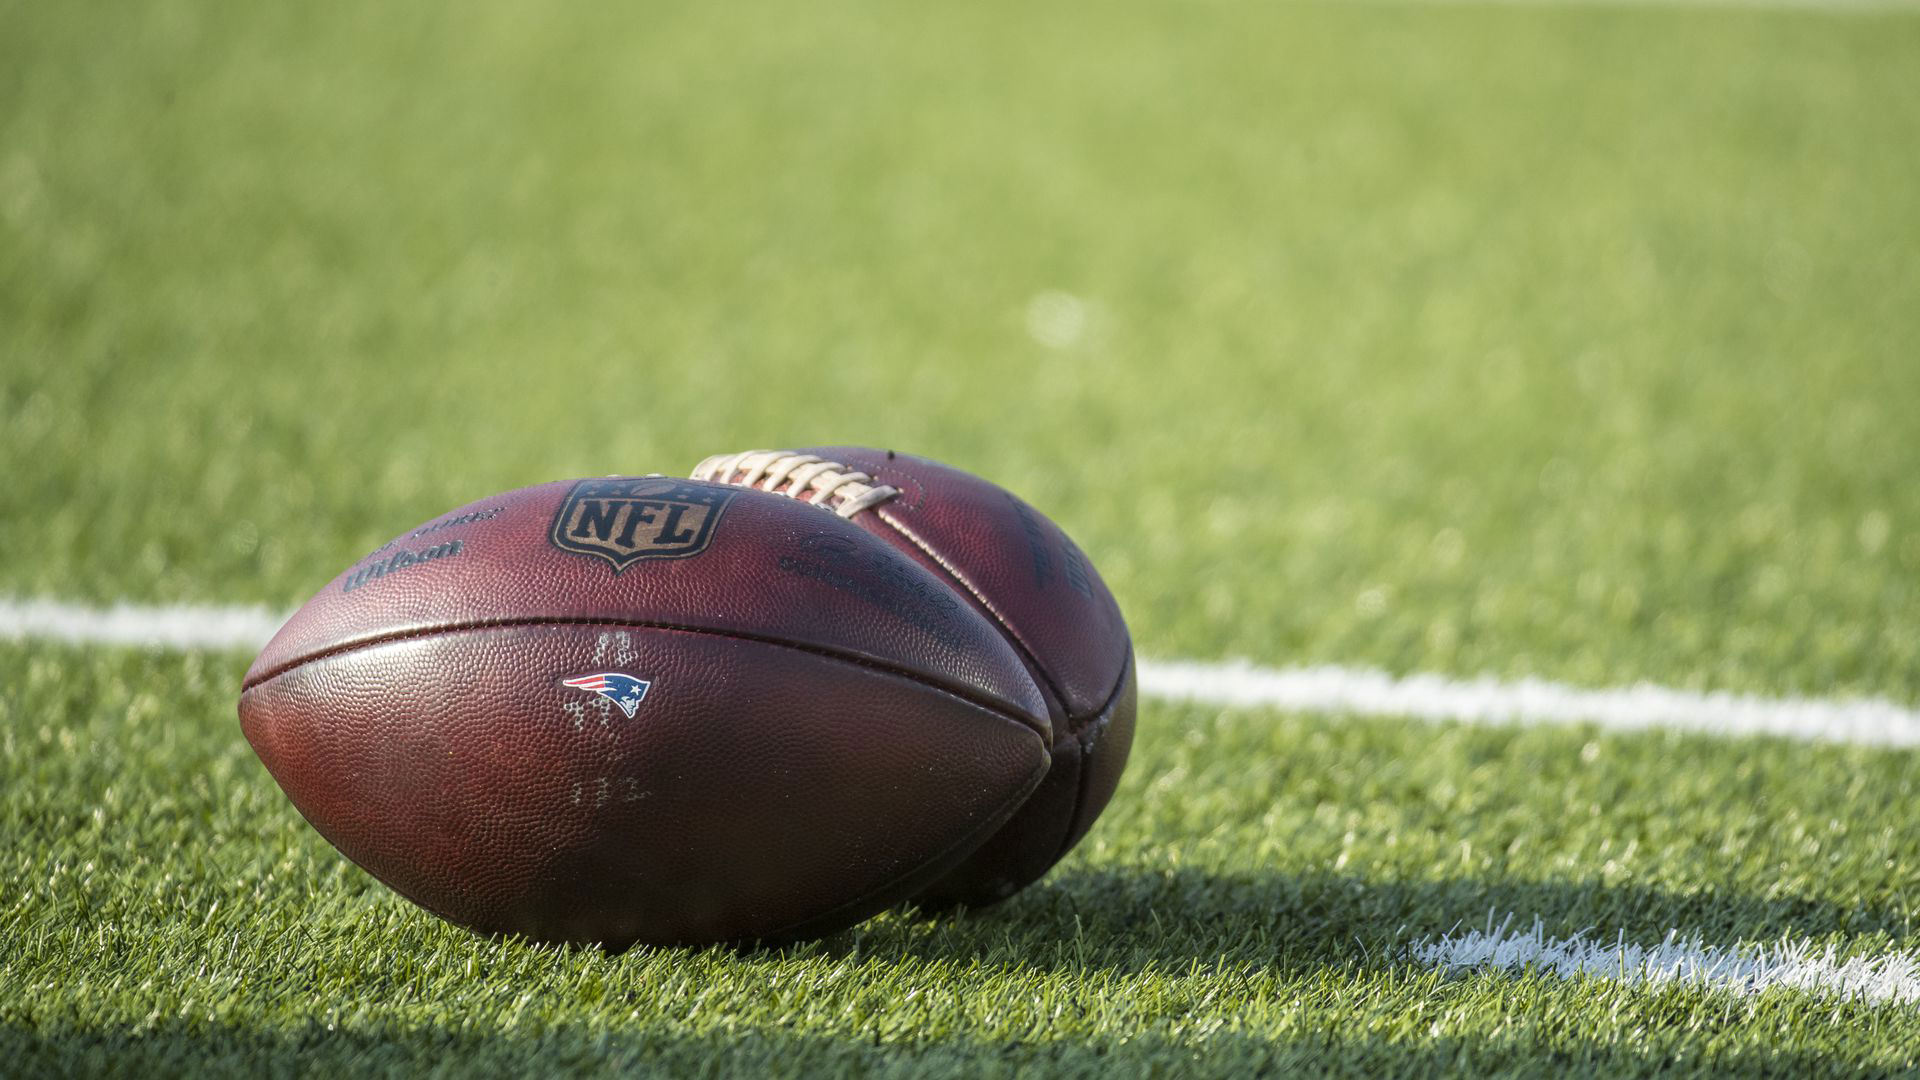 NFL officials accused of not properly inflating kicking balls for ...